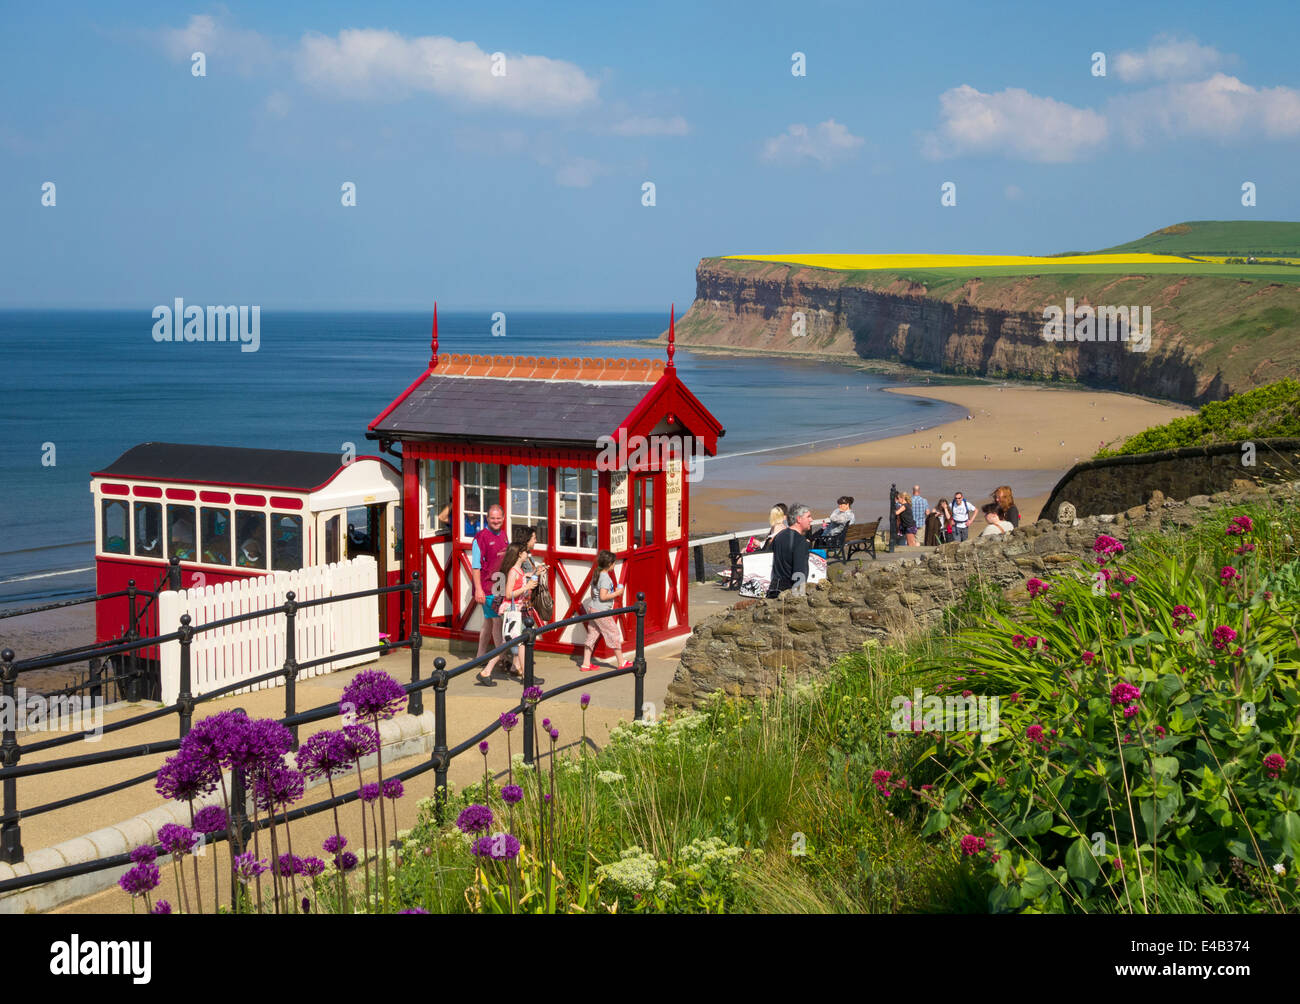 Saltburn beach and cliffs from Cliff lift station. Saltburn by the Sea, North Yorkshire, England, UK Stock Photo